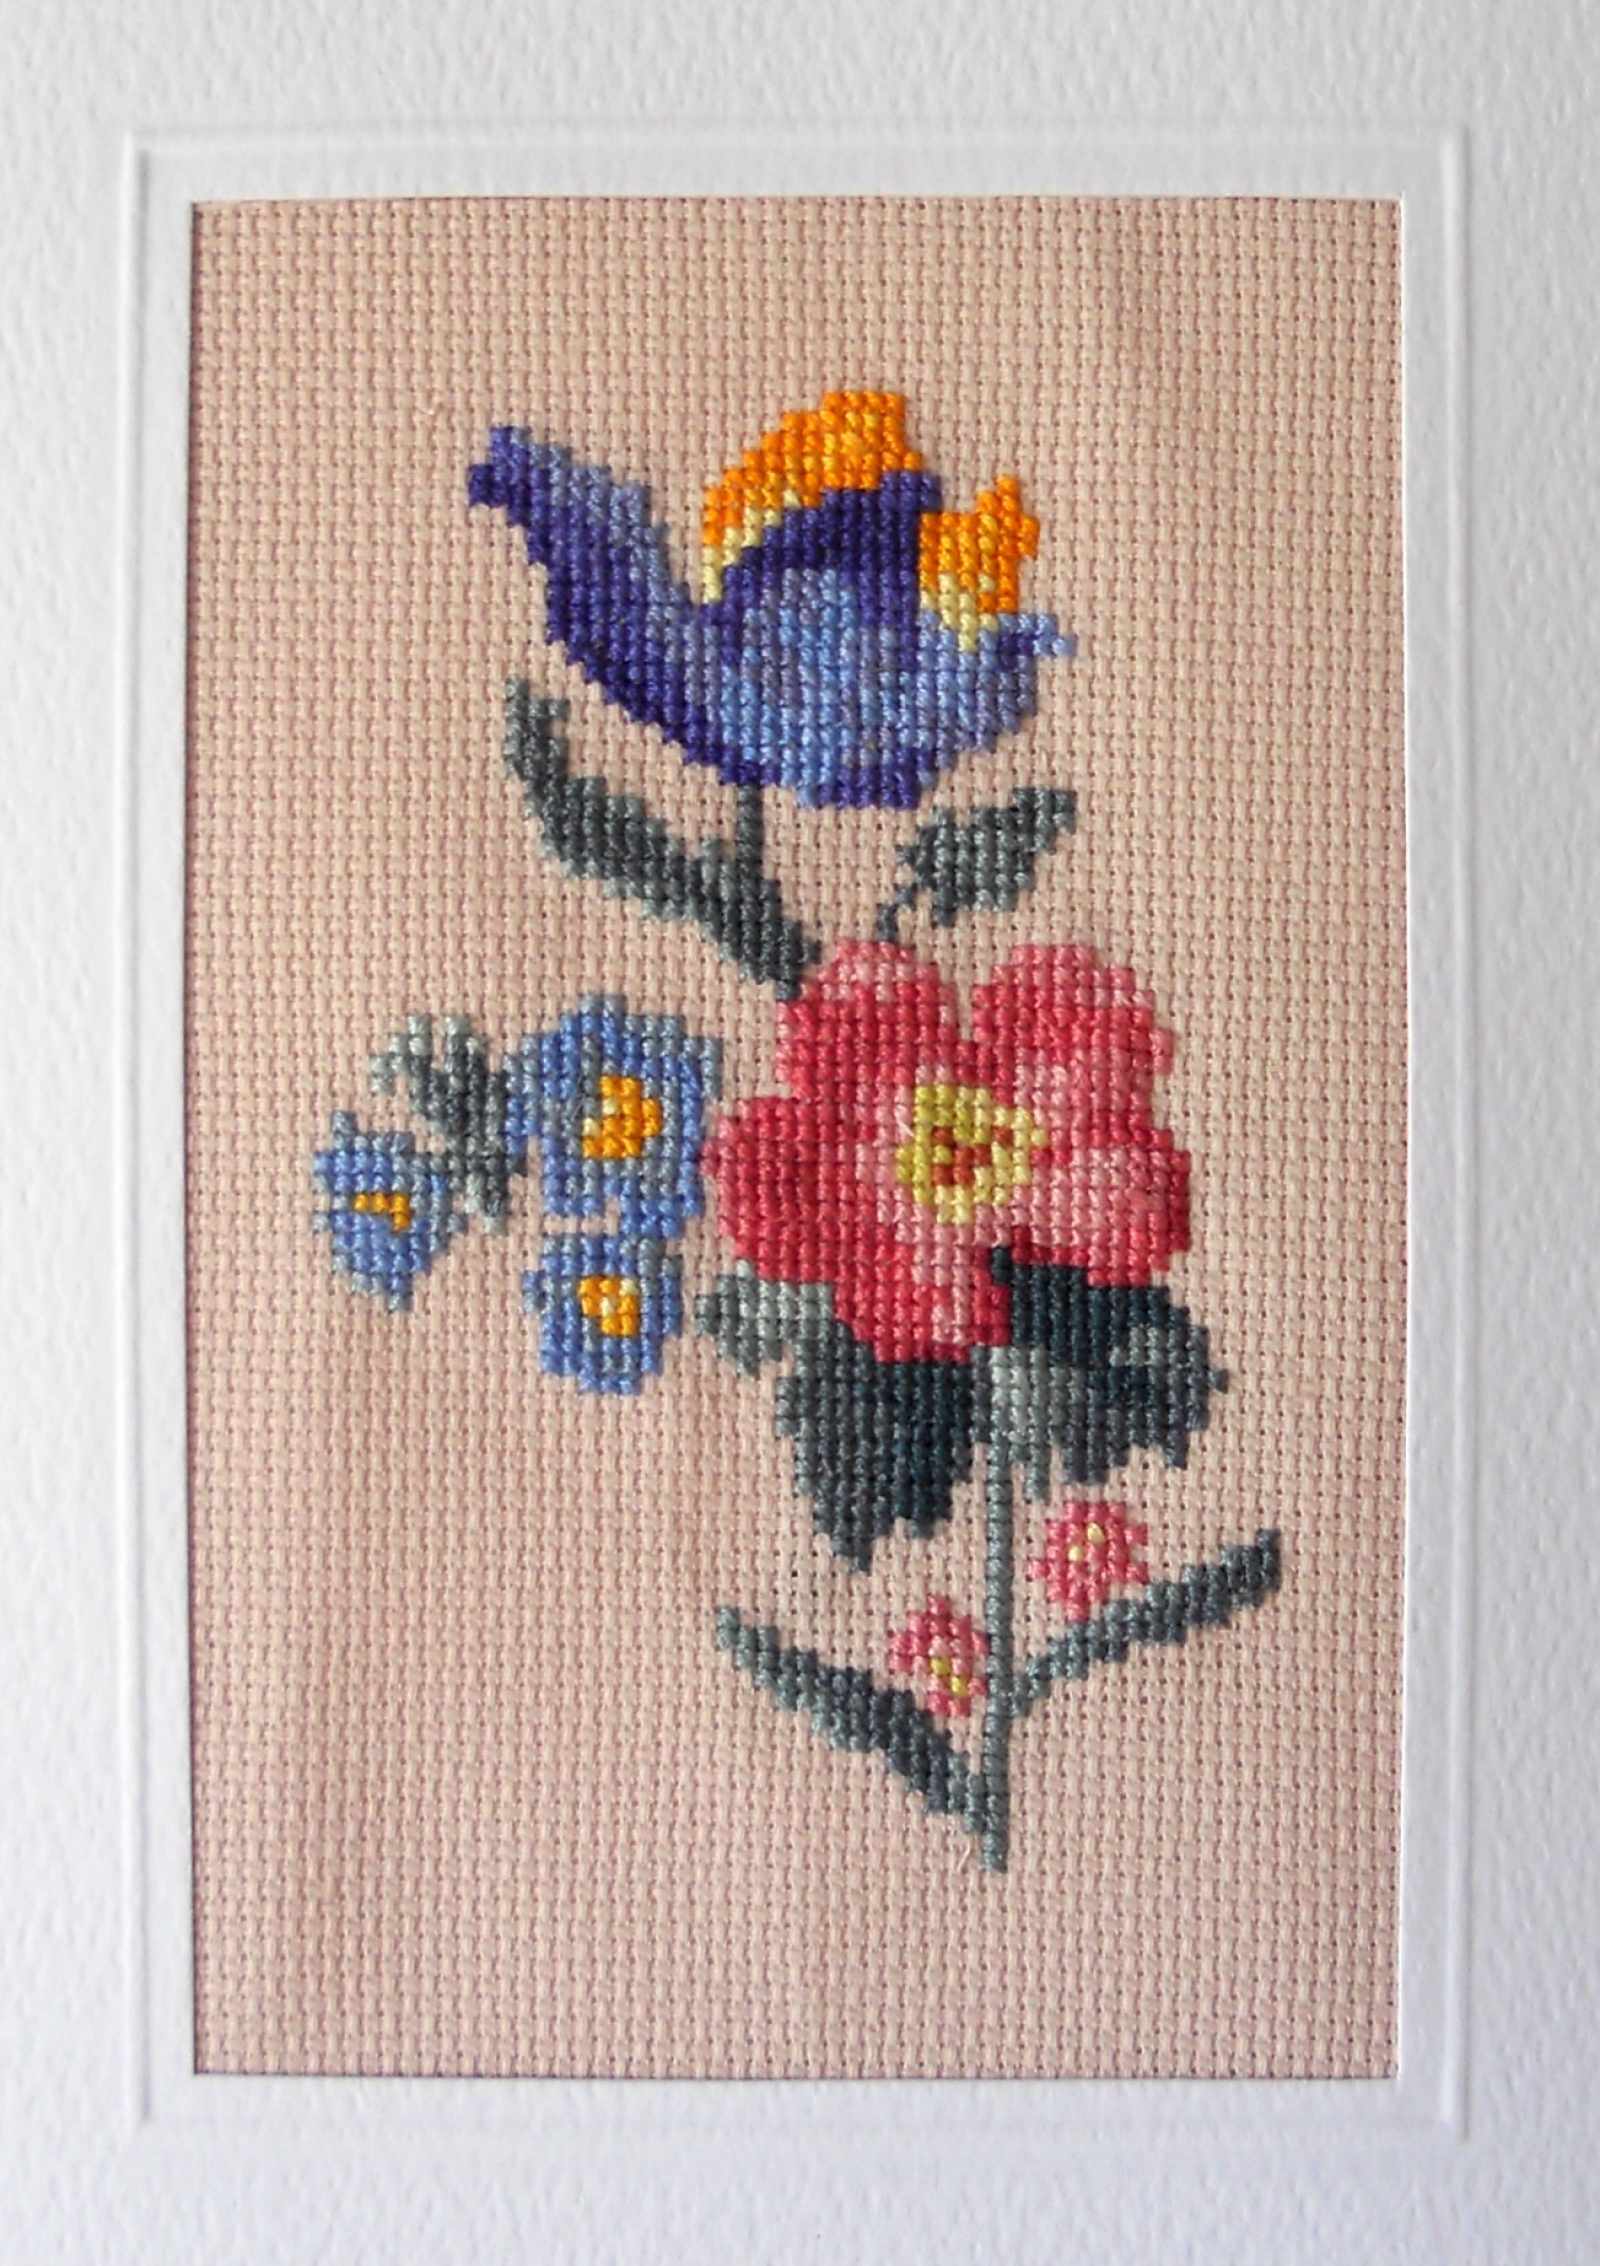 Flower Bouquet Pattern Counted Cross Stitch Kits for Adults and